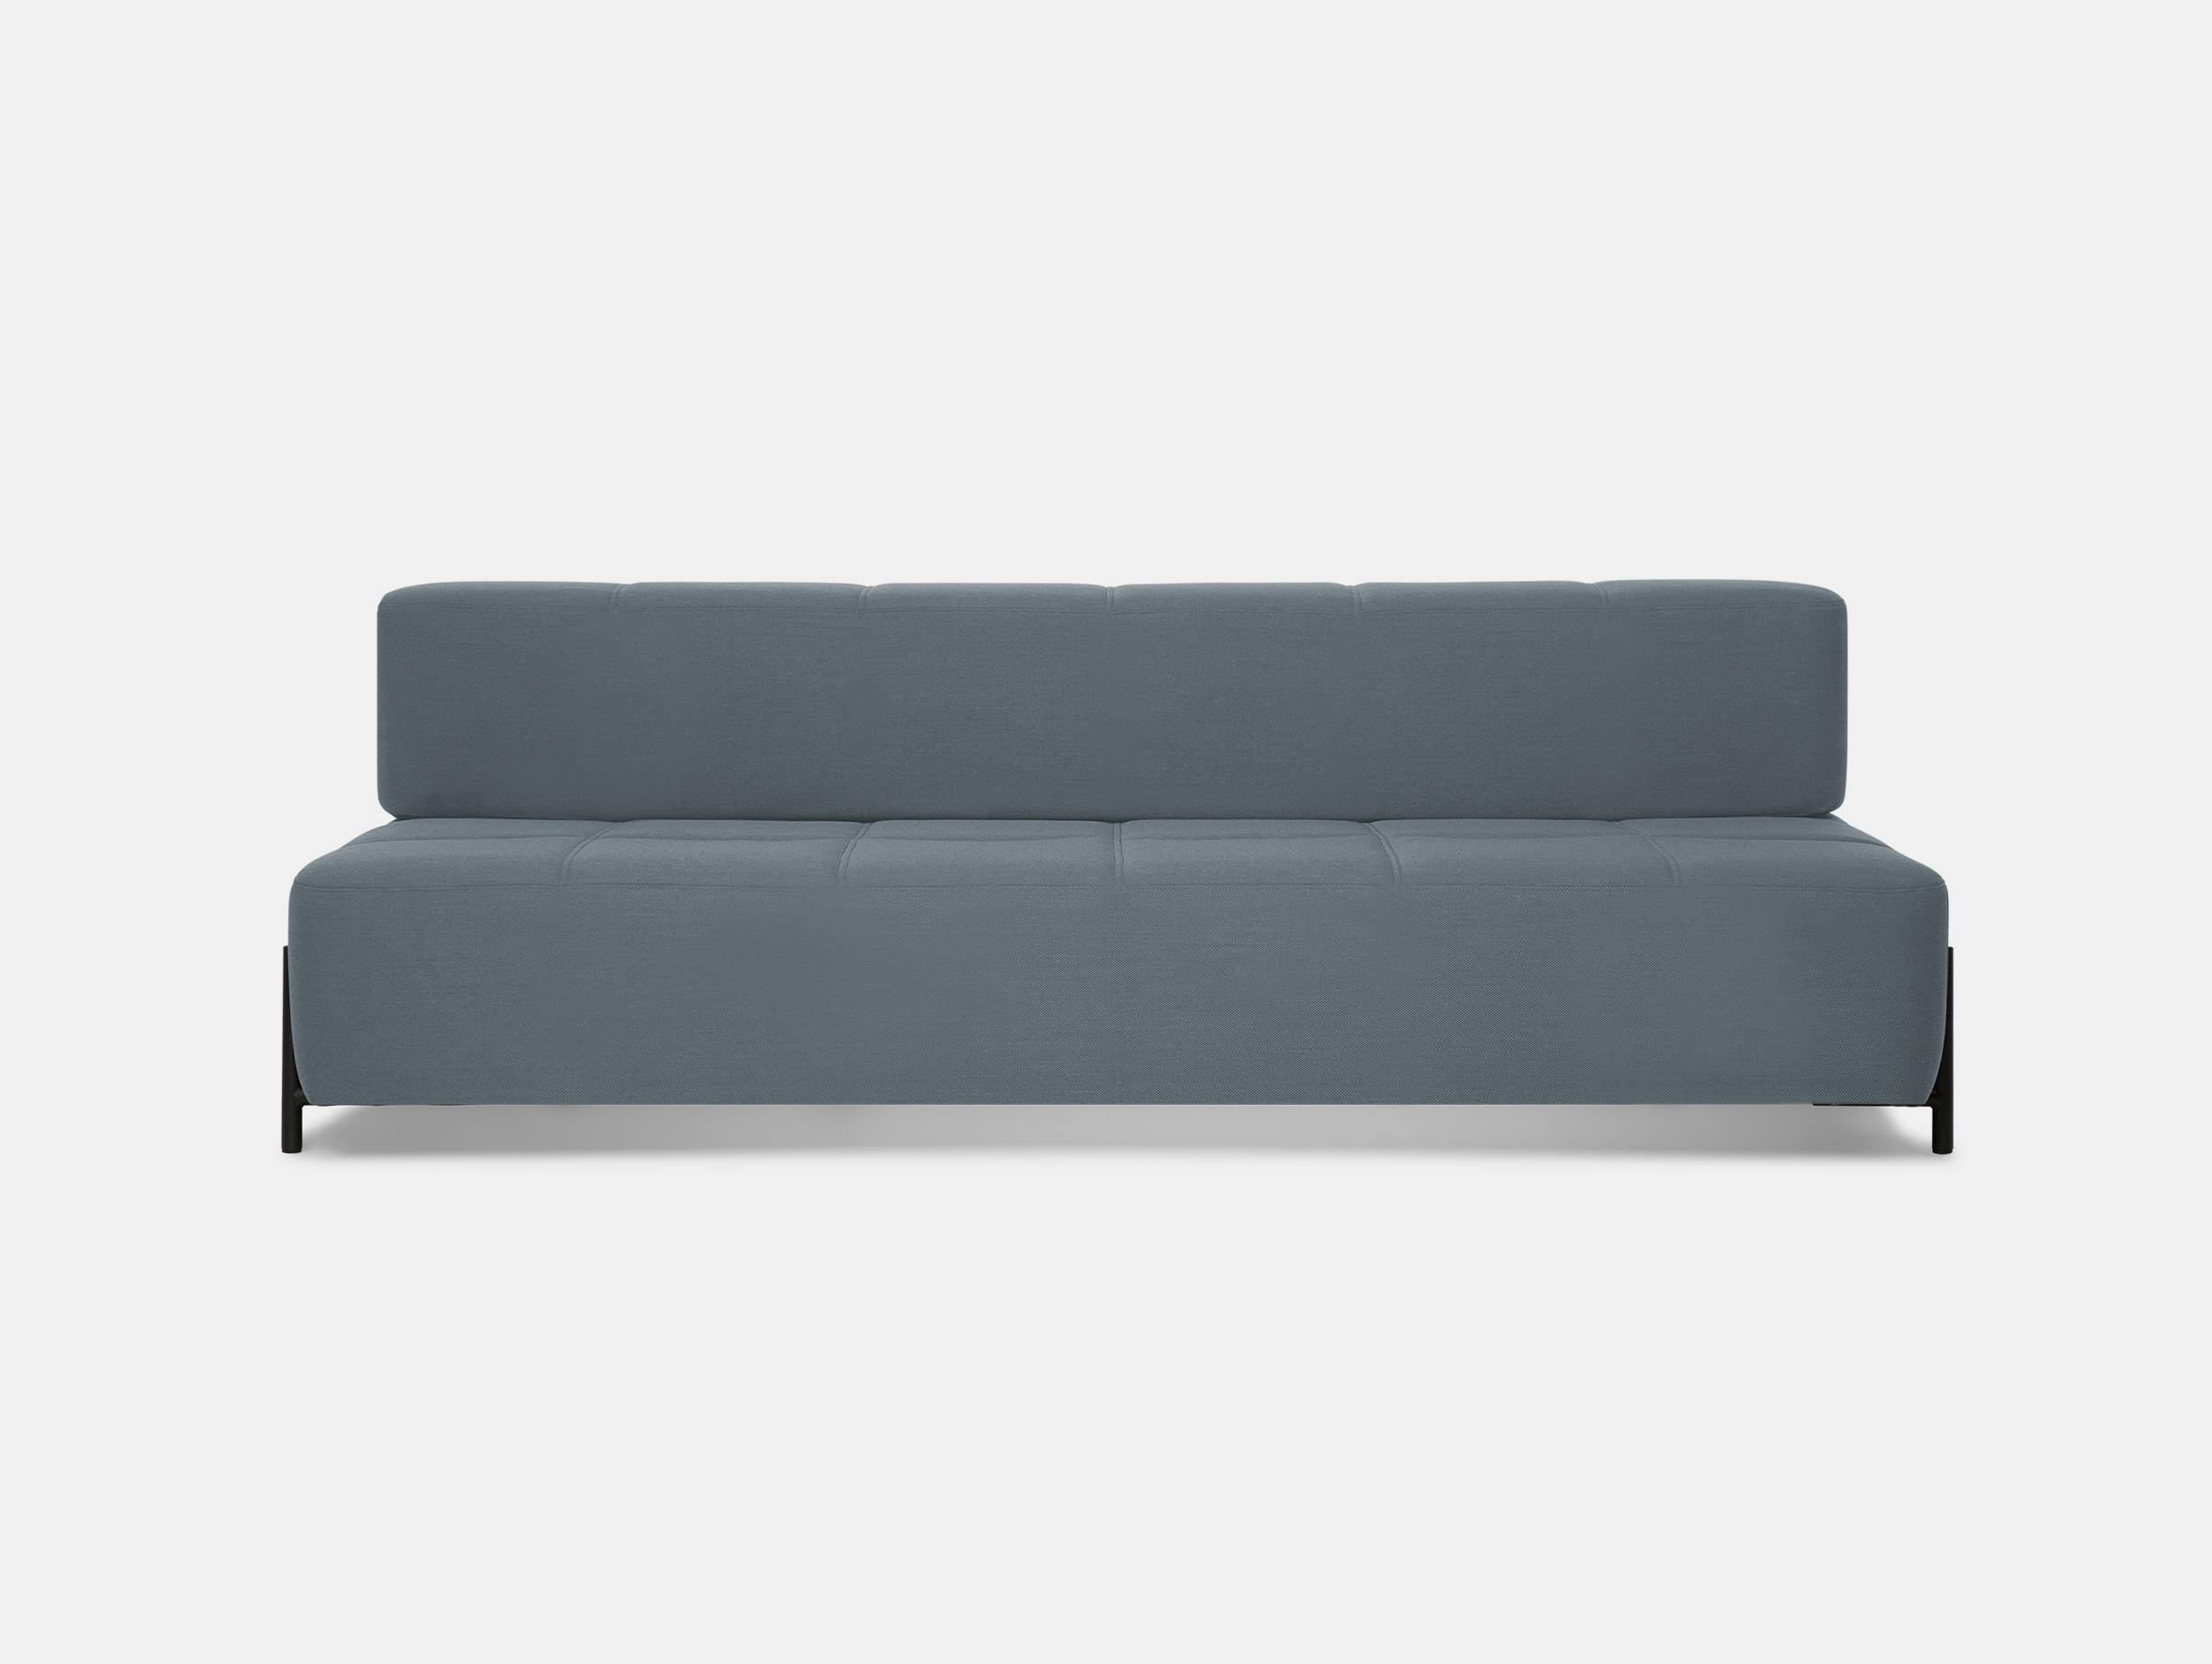 Northern daybe sofa bed grey blue